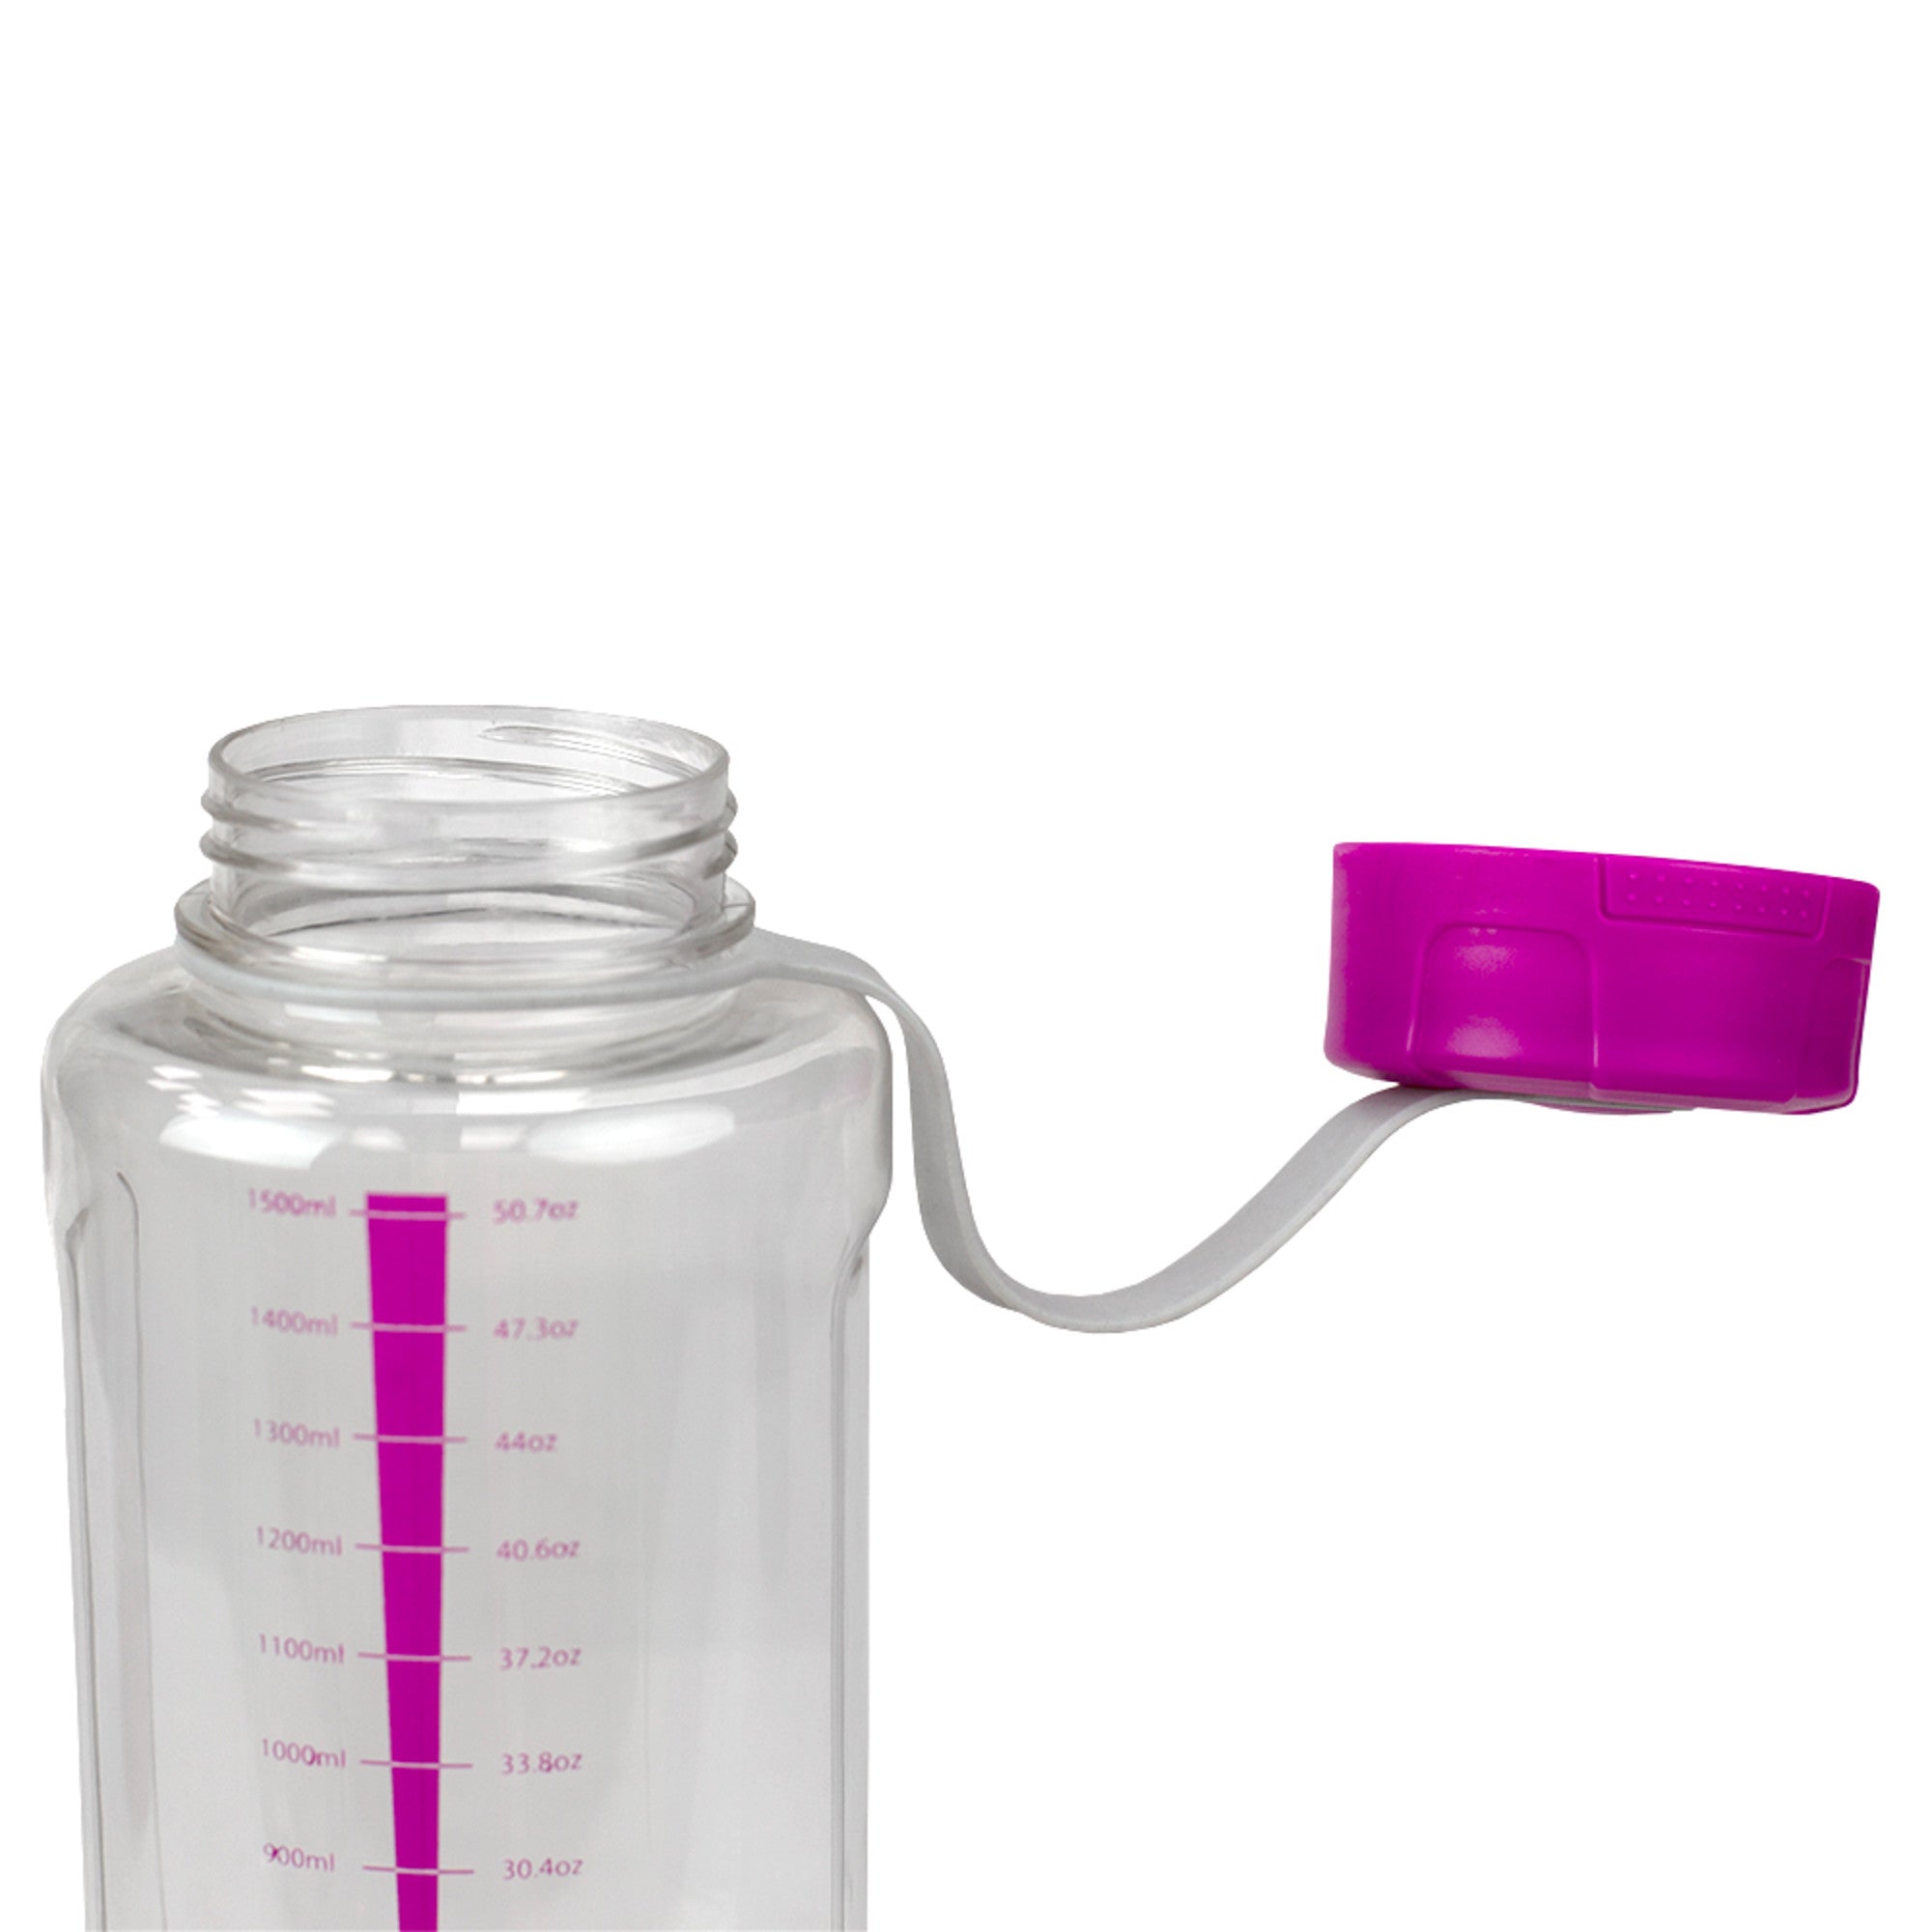 Home Basics  50 oz. Plastic Water Bottle with Measurement Markings - Assorted Colors